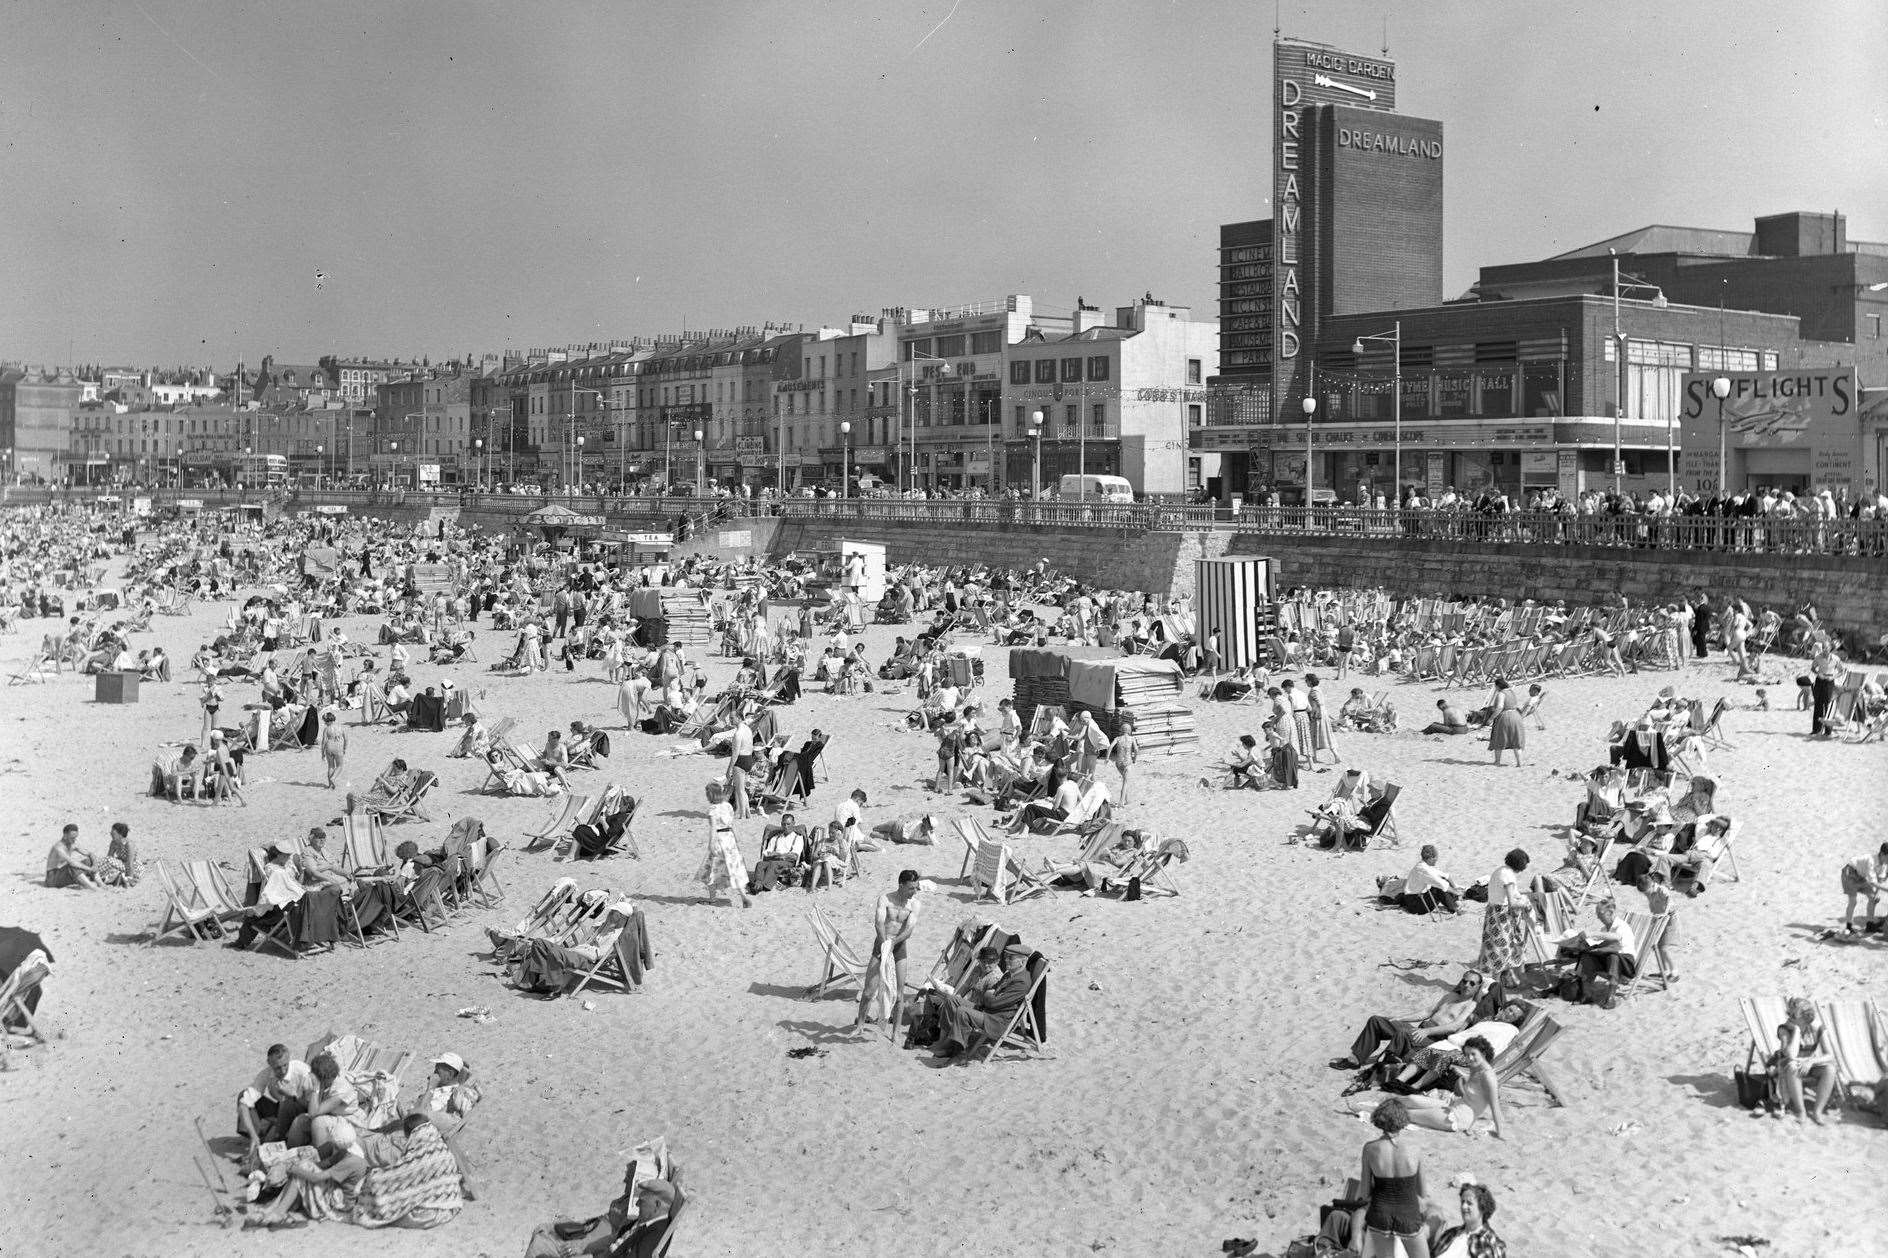 Margate was once the go-to destination on Kent’s north coast...now it’s reclaiming its crown